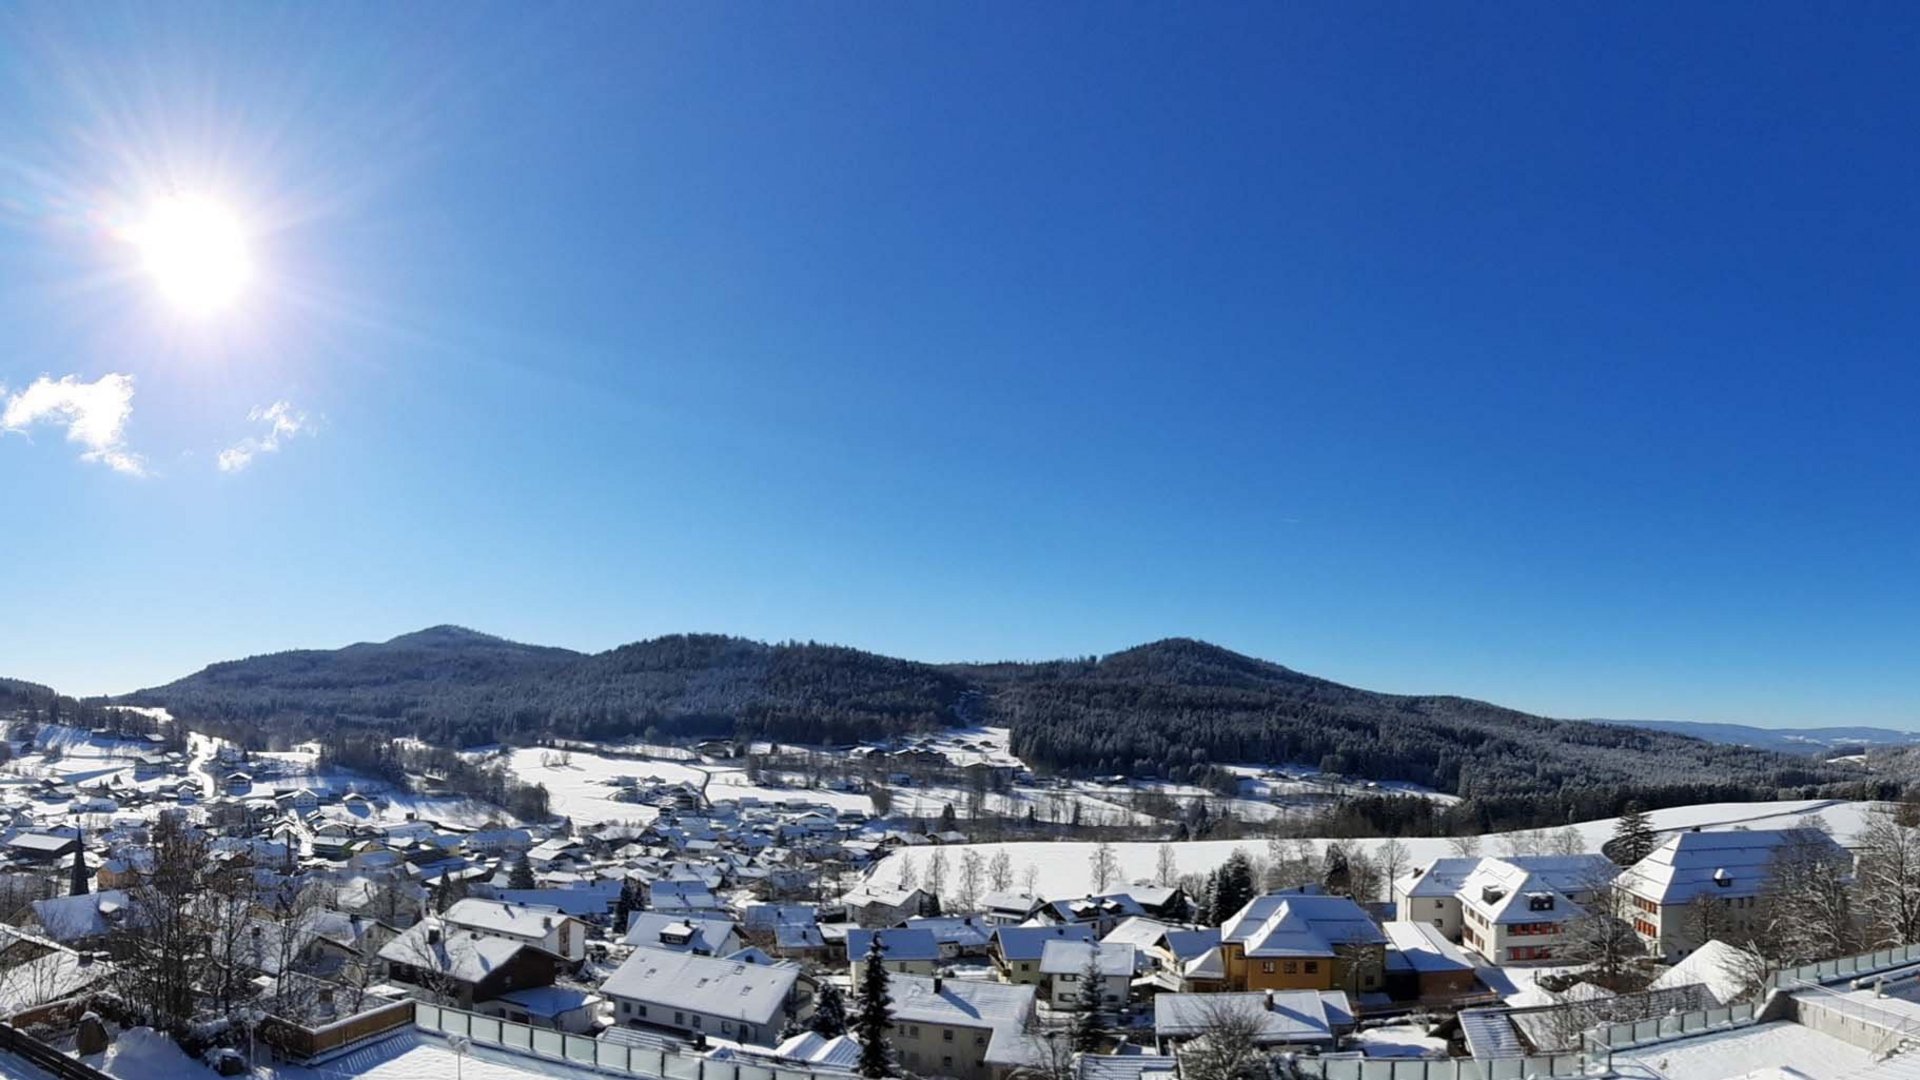 Cross-country skiing and winter hiking: Bodenmais in winter